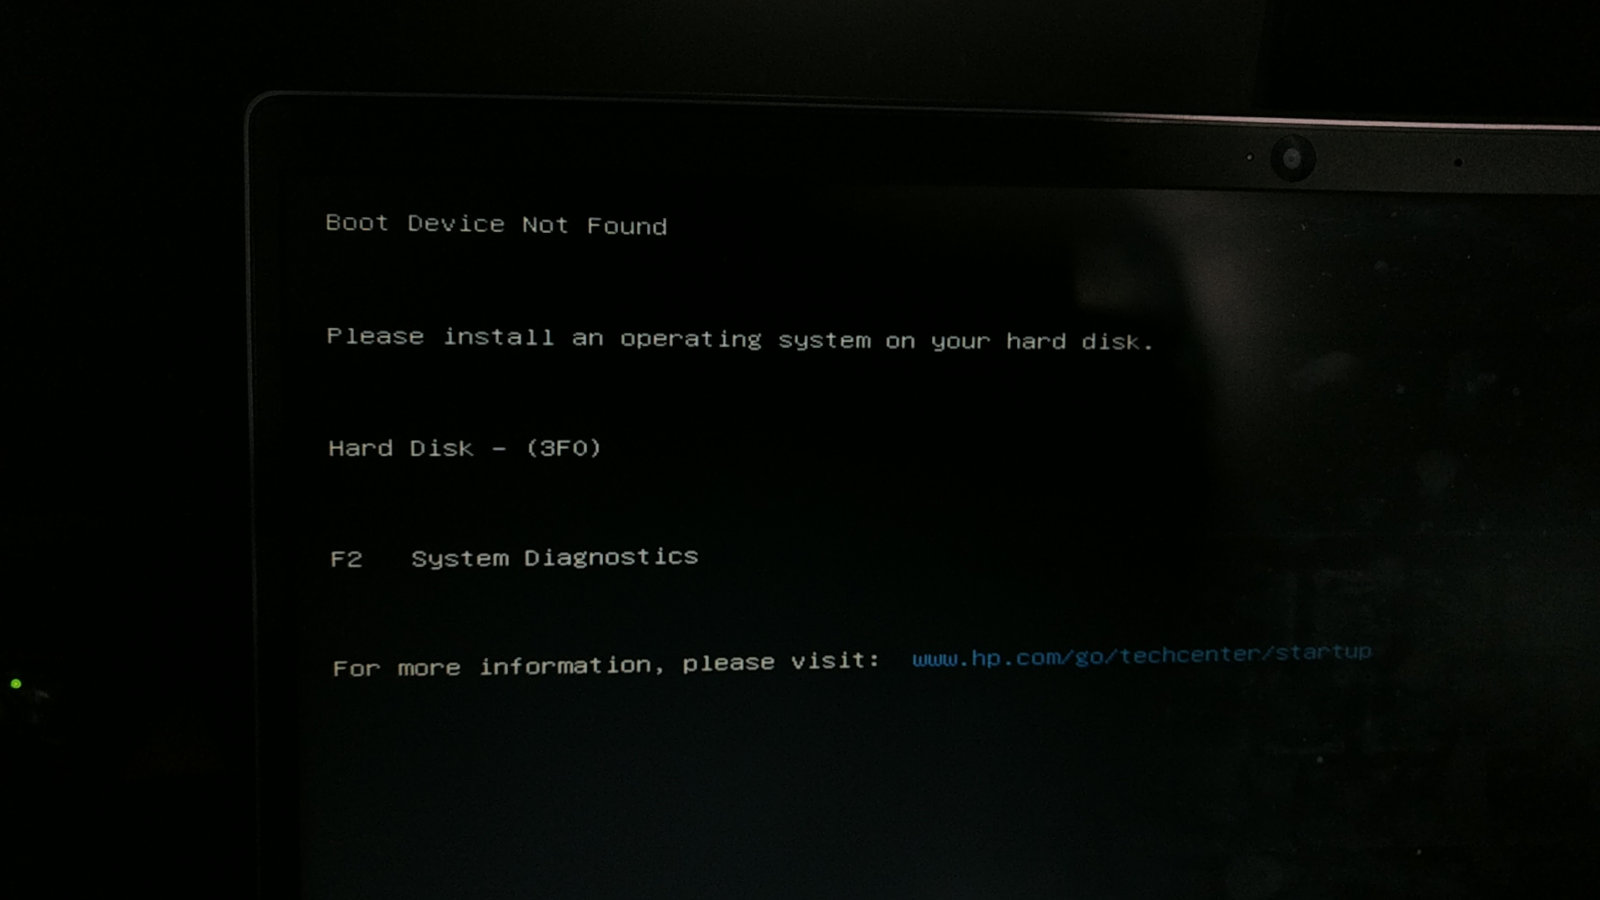 SSD seems to be disconnecting - HP Support Community - 7138519